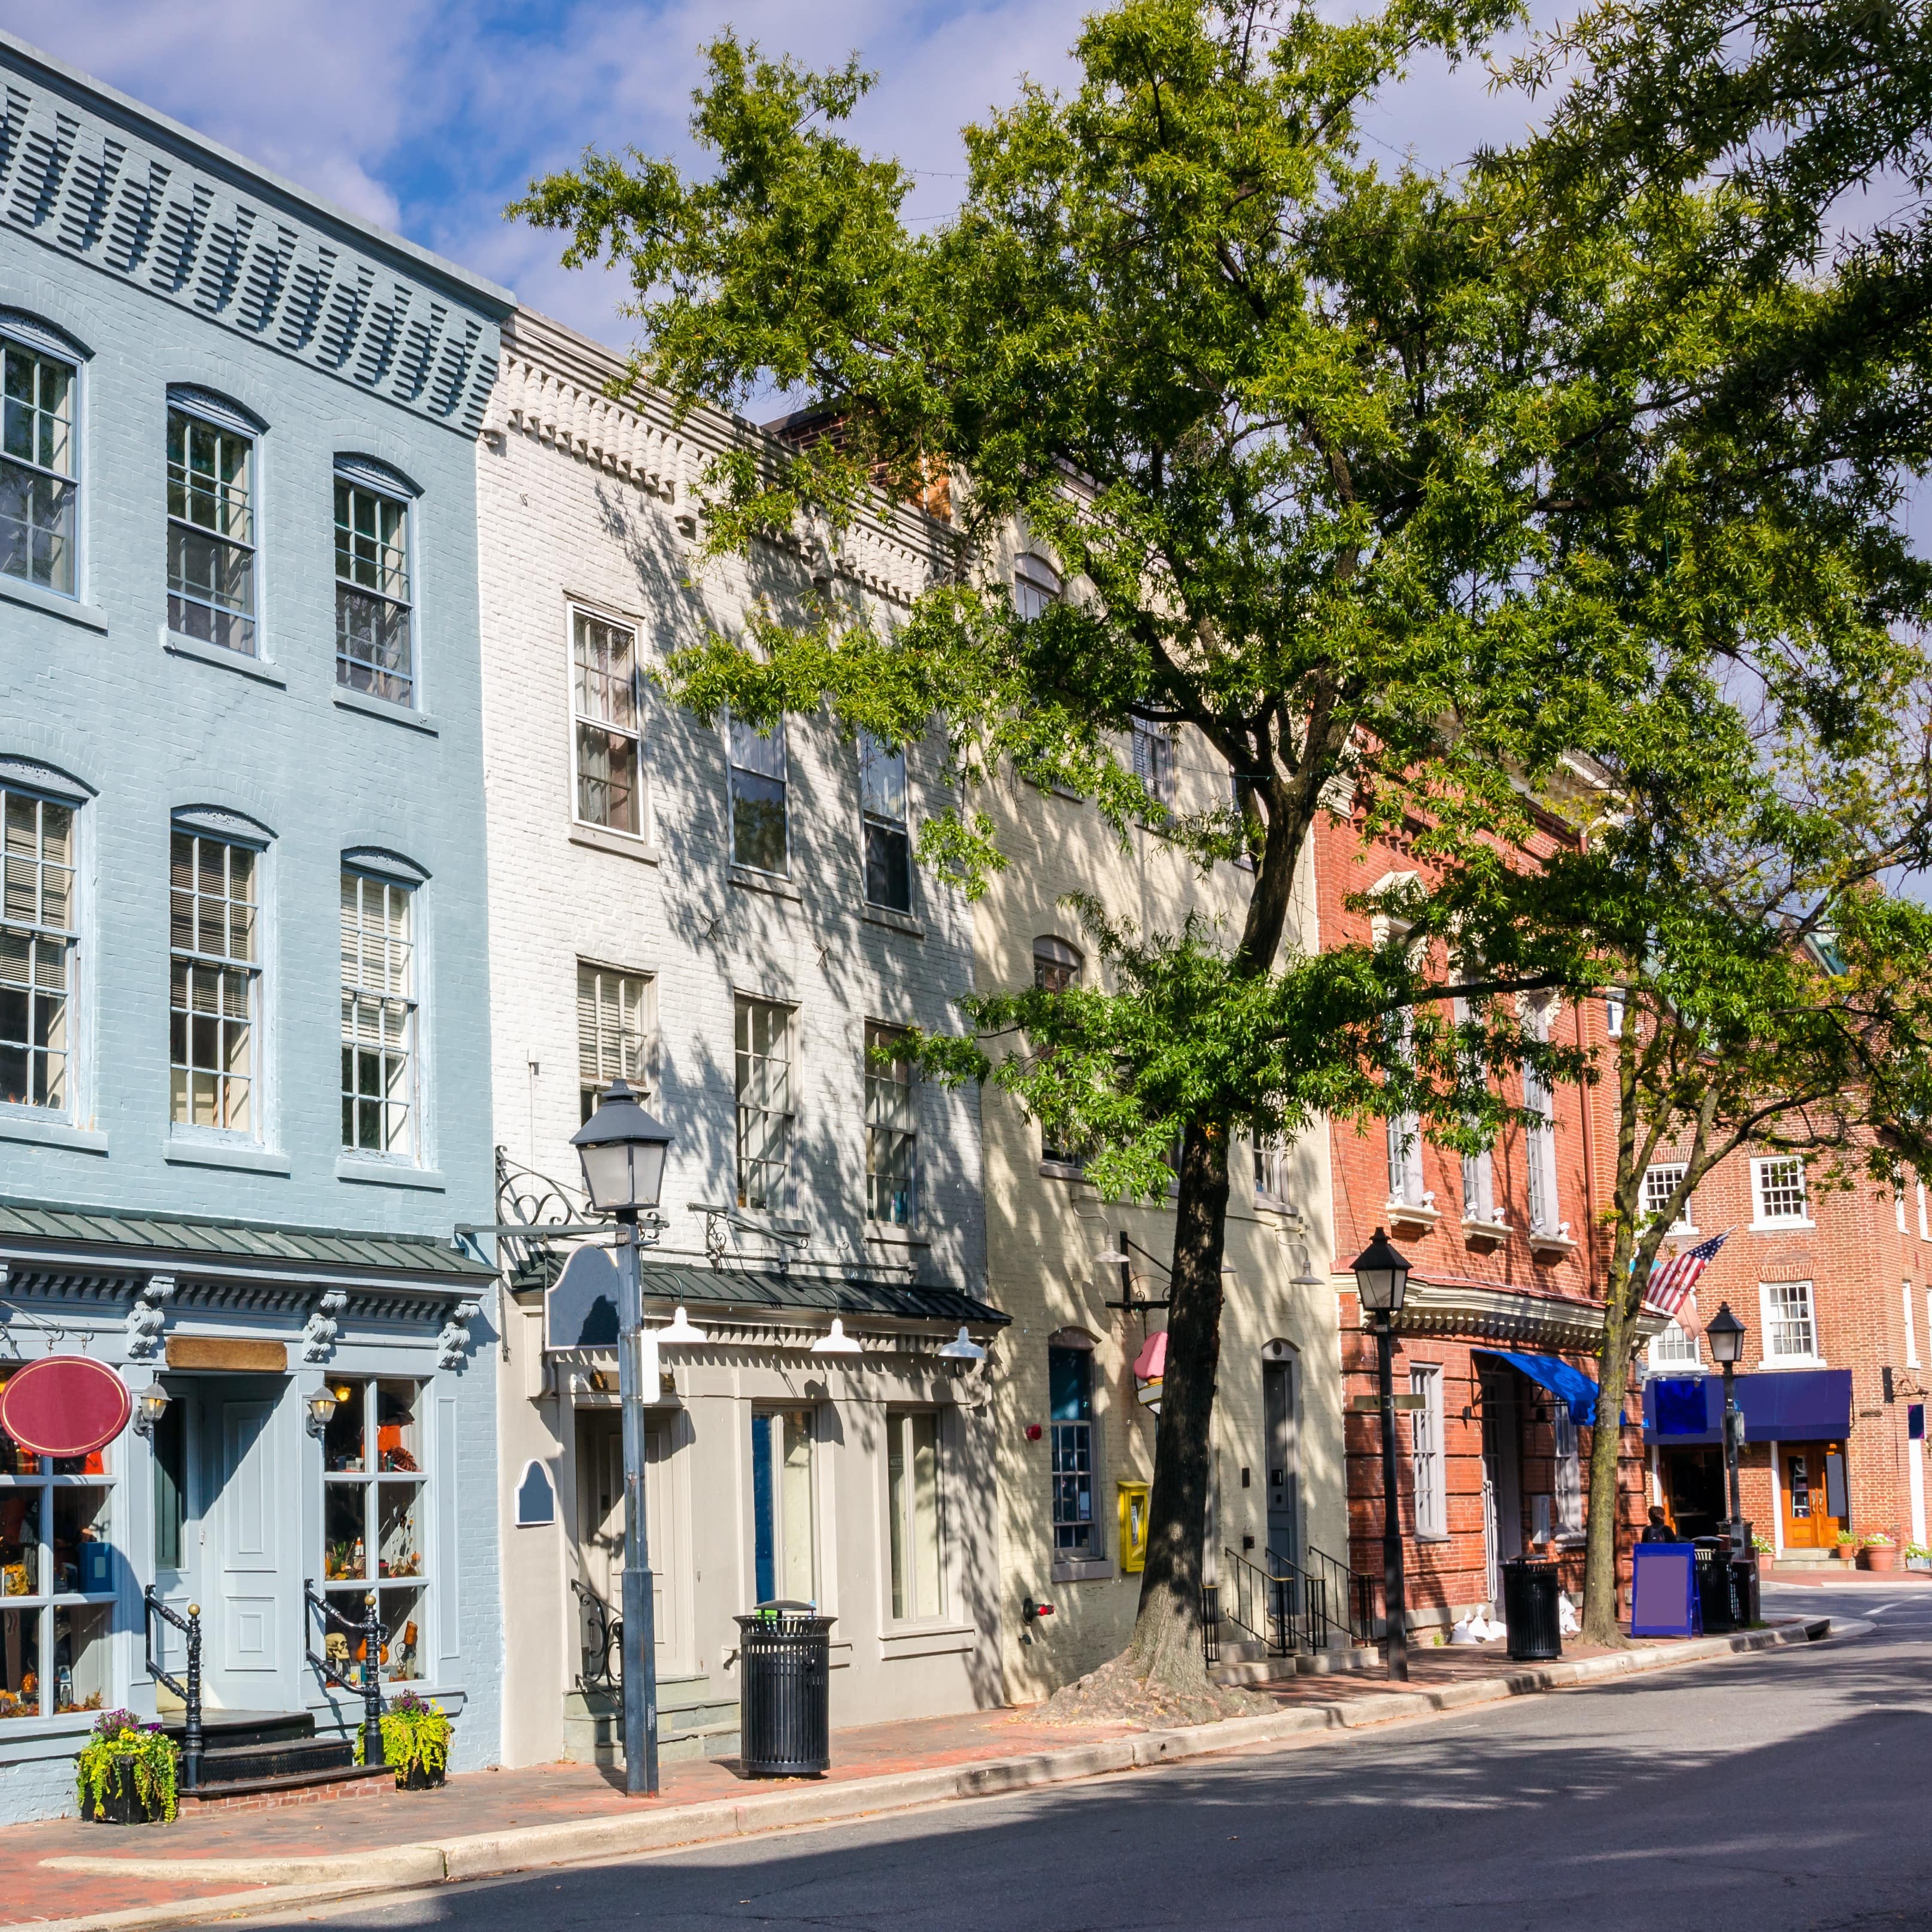 Old Town Alexandria offers plenty of shopping and dining options